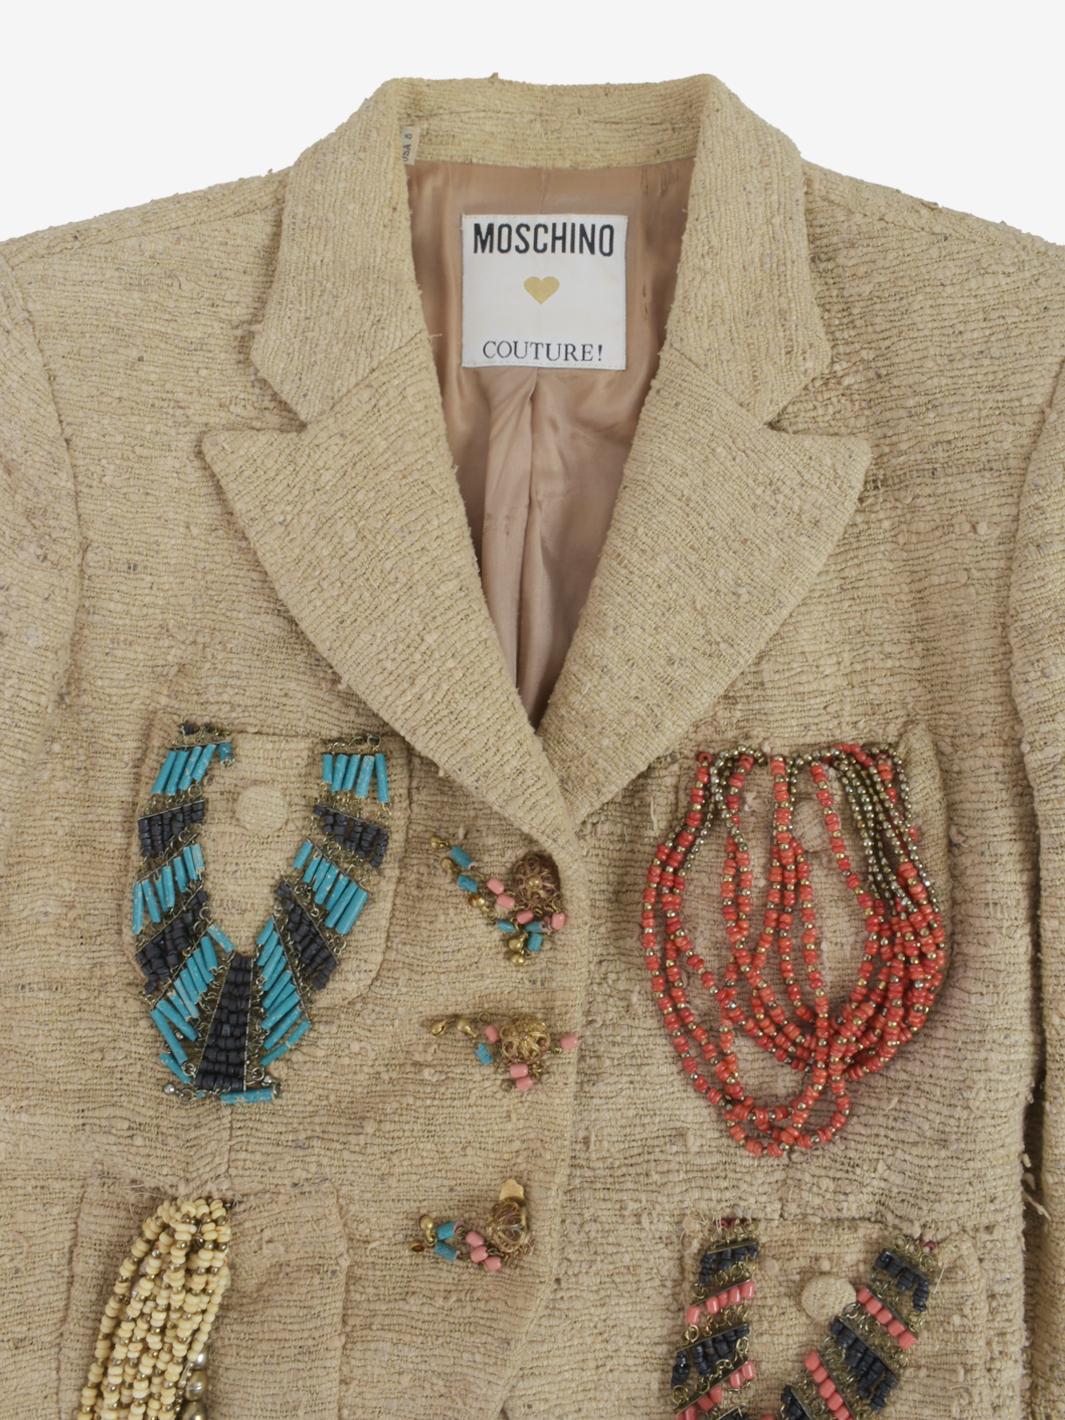 Moschino Couture Blazer With Pendants Decorations - 90s For Sale 1